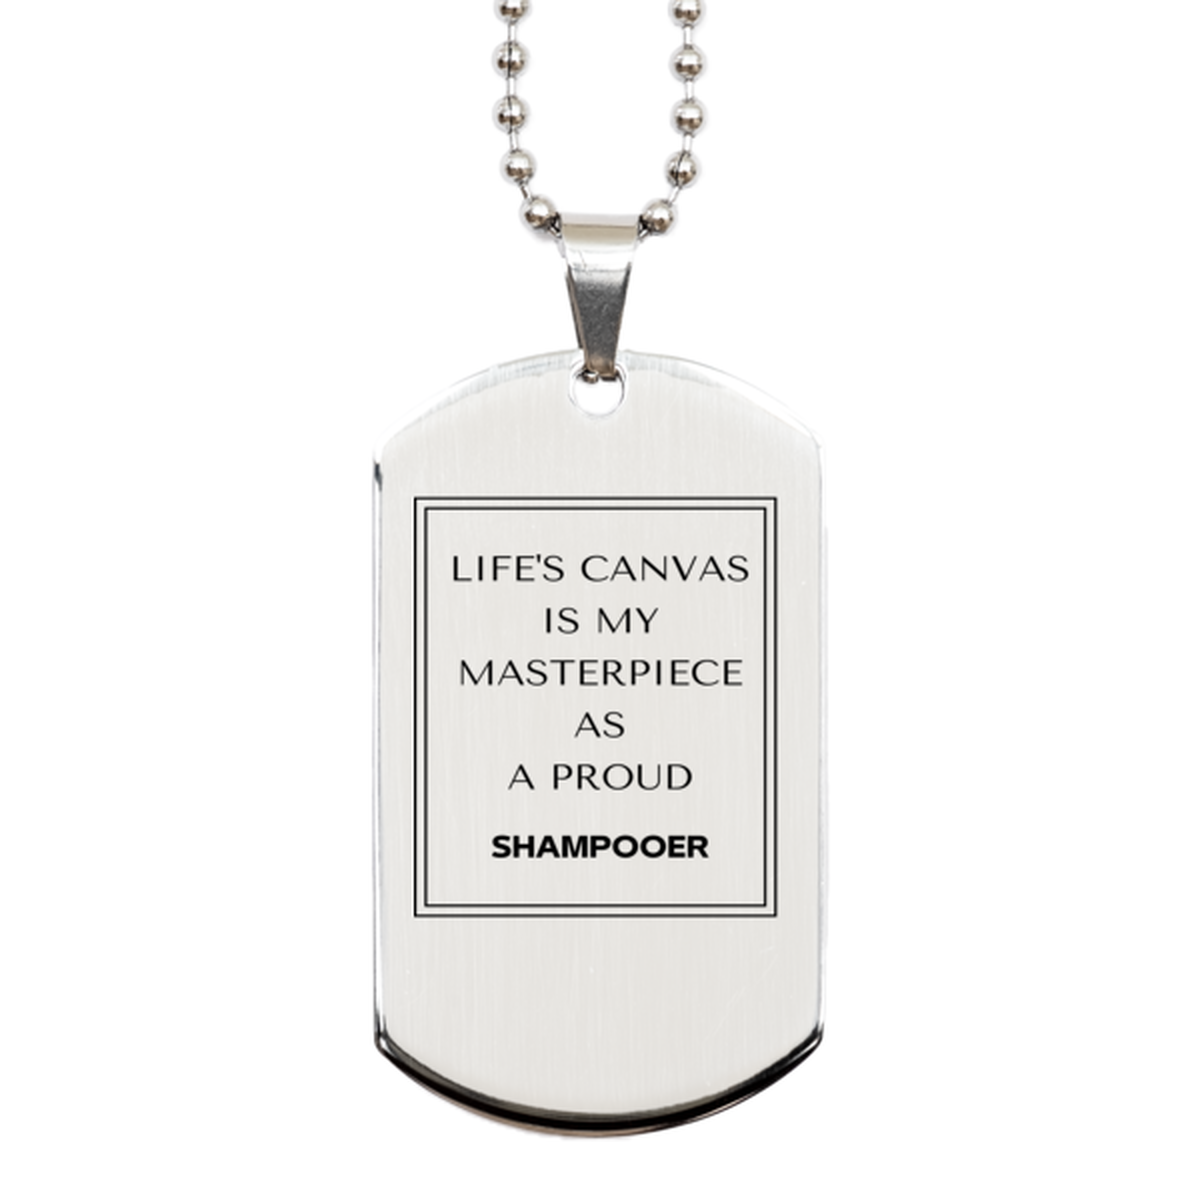 Proud Shampooer Gifts, Life's canvas is my masterpiece, Epic Birthday Christmas Unique Silver Dog Tag For Shampooer, Coworkers, Men, Women, Friends